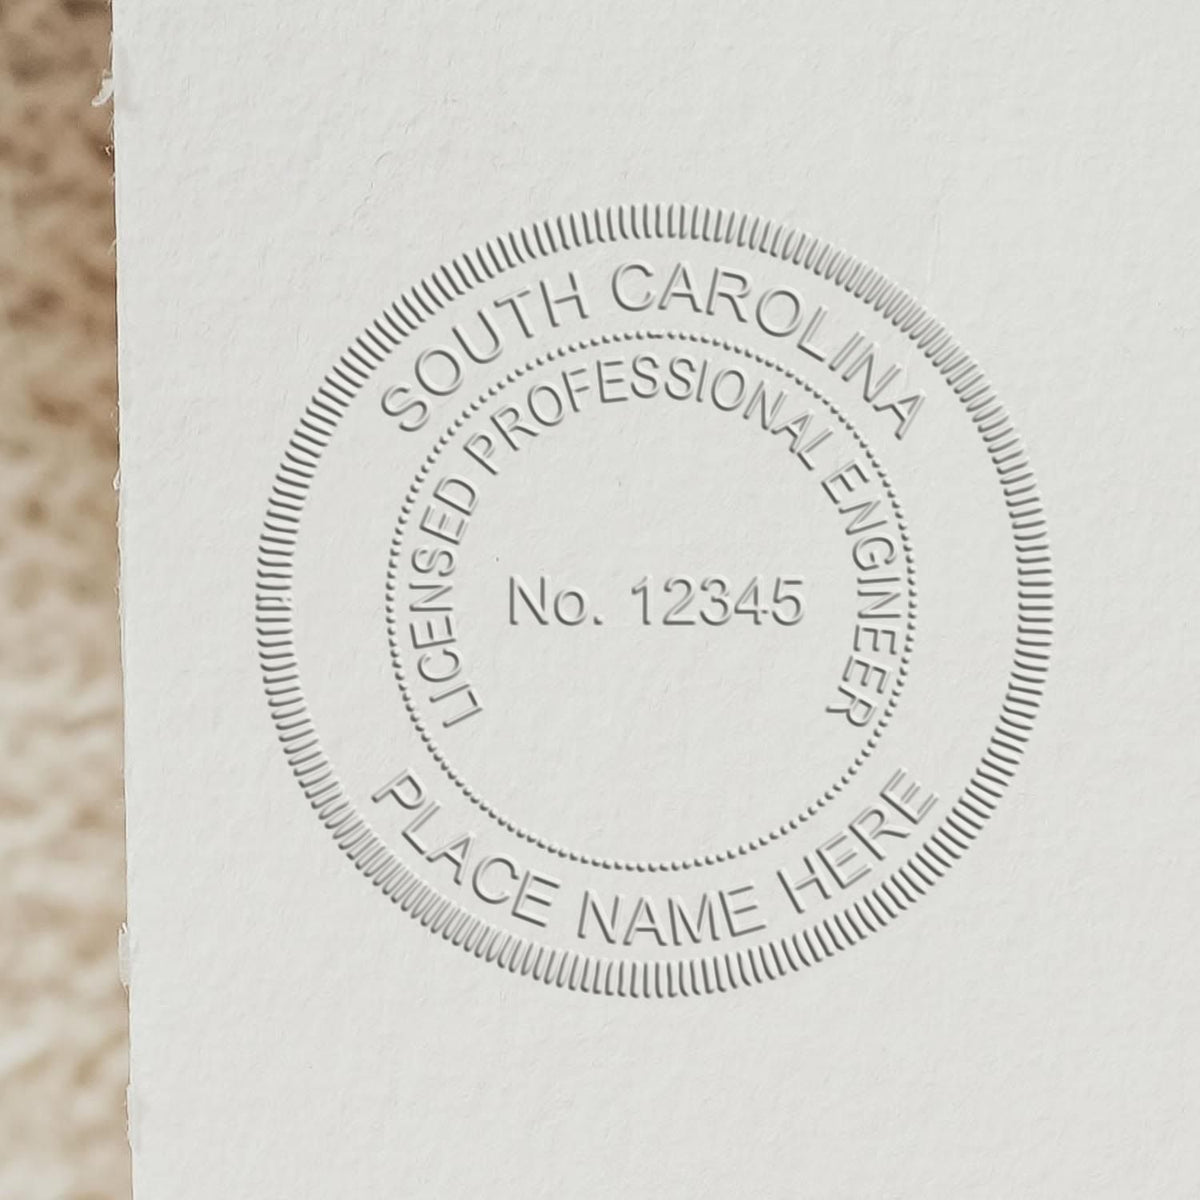 The Gift South Carolina Engineer Seal stamp impression comes to life with a crisp, detailed image stamped on paper - showcasing true professional quality.